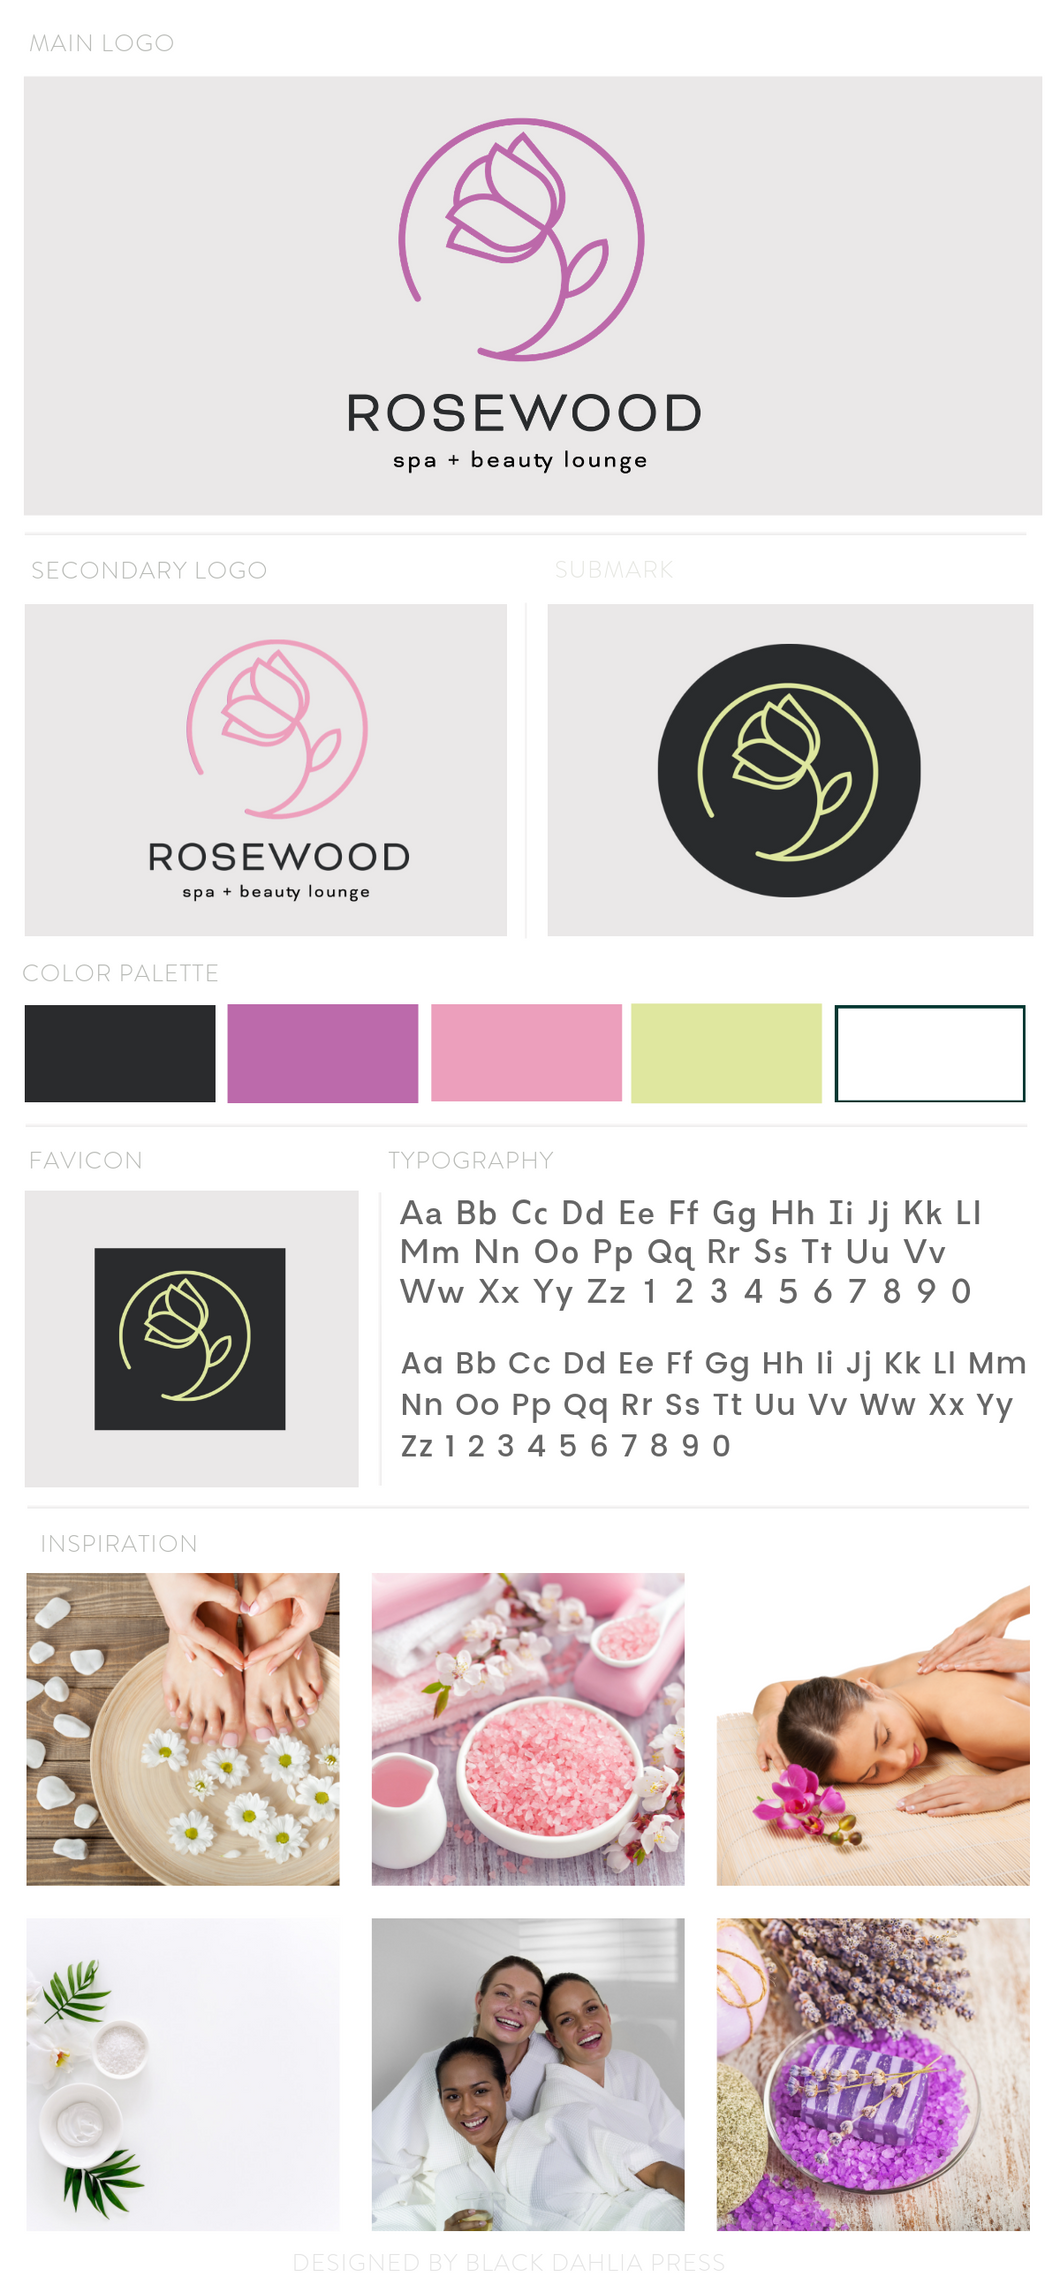 Rosewood Spa Pre-Made Brand